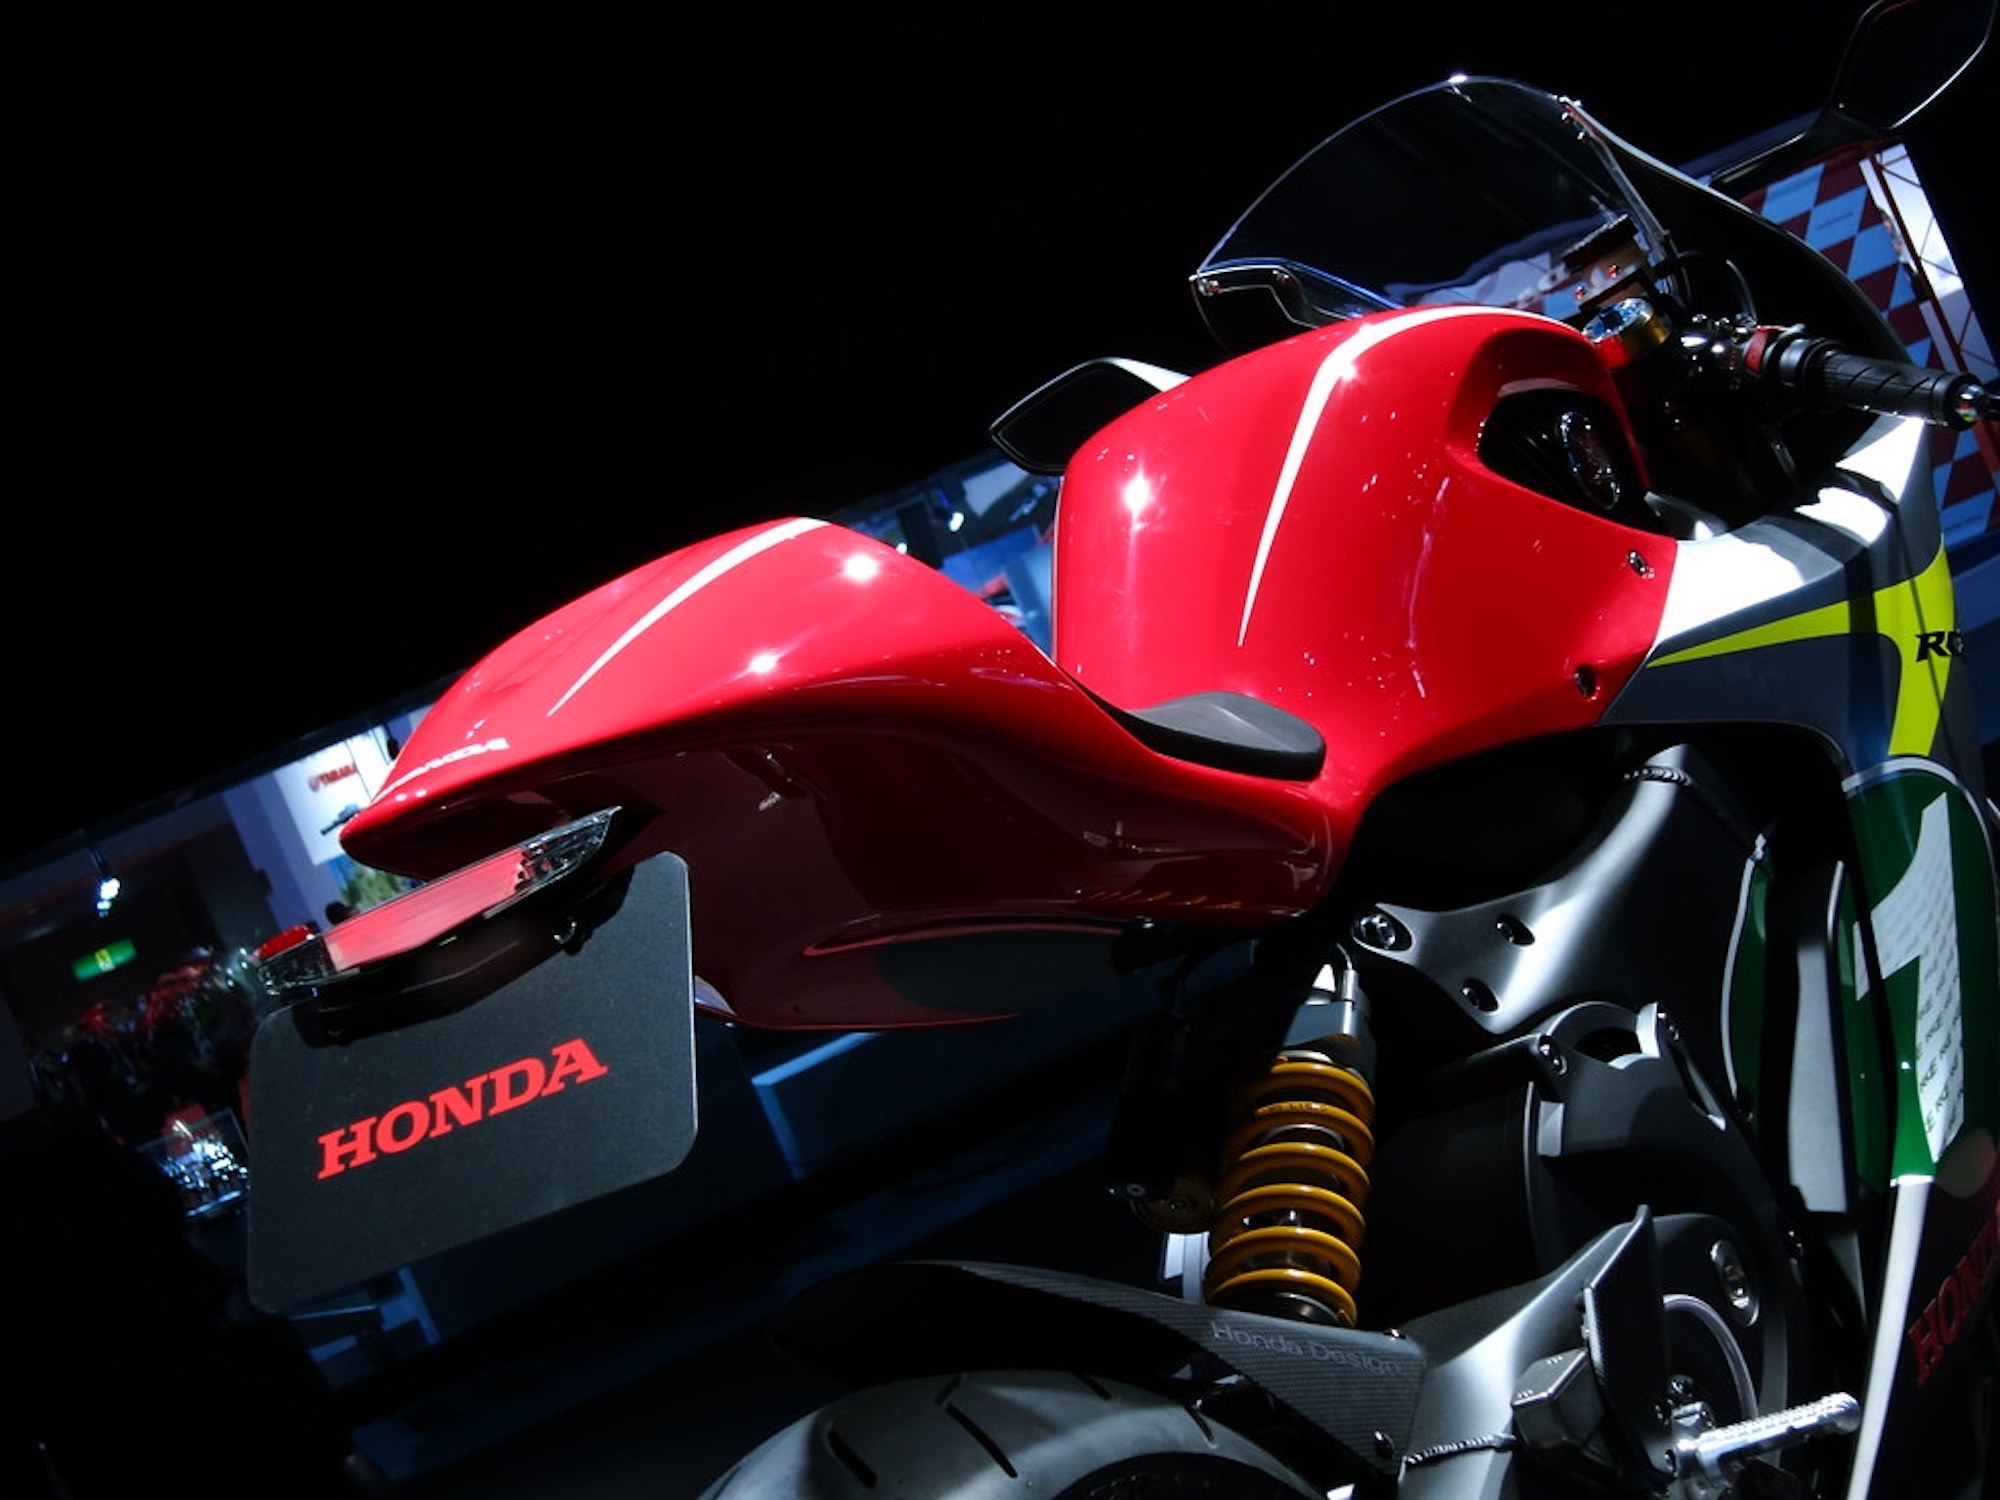 A view of Honda's RC-E, debuted at 2011's Japan Motor Show (Japan Mobility Show). Photo taken by Fotois/dmaniax.